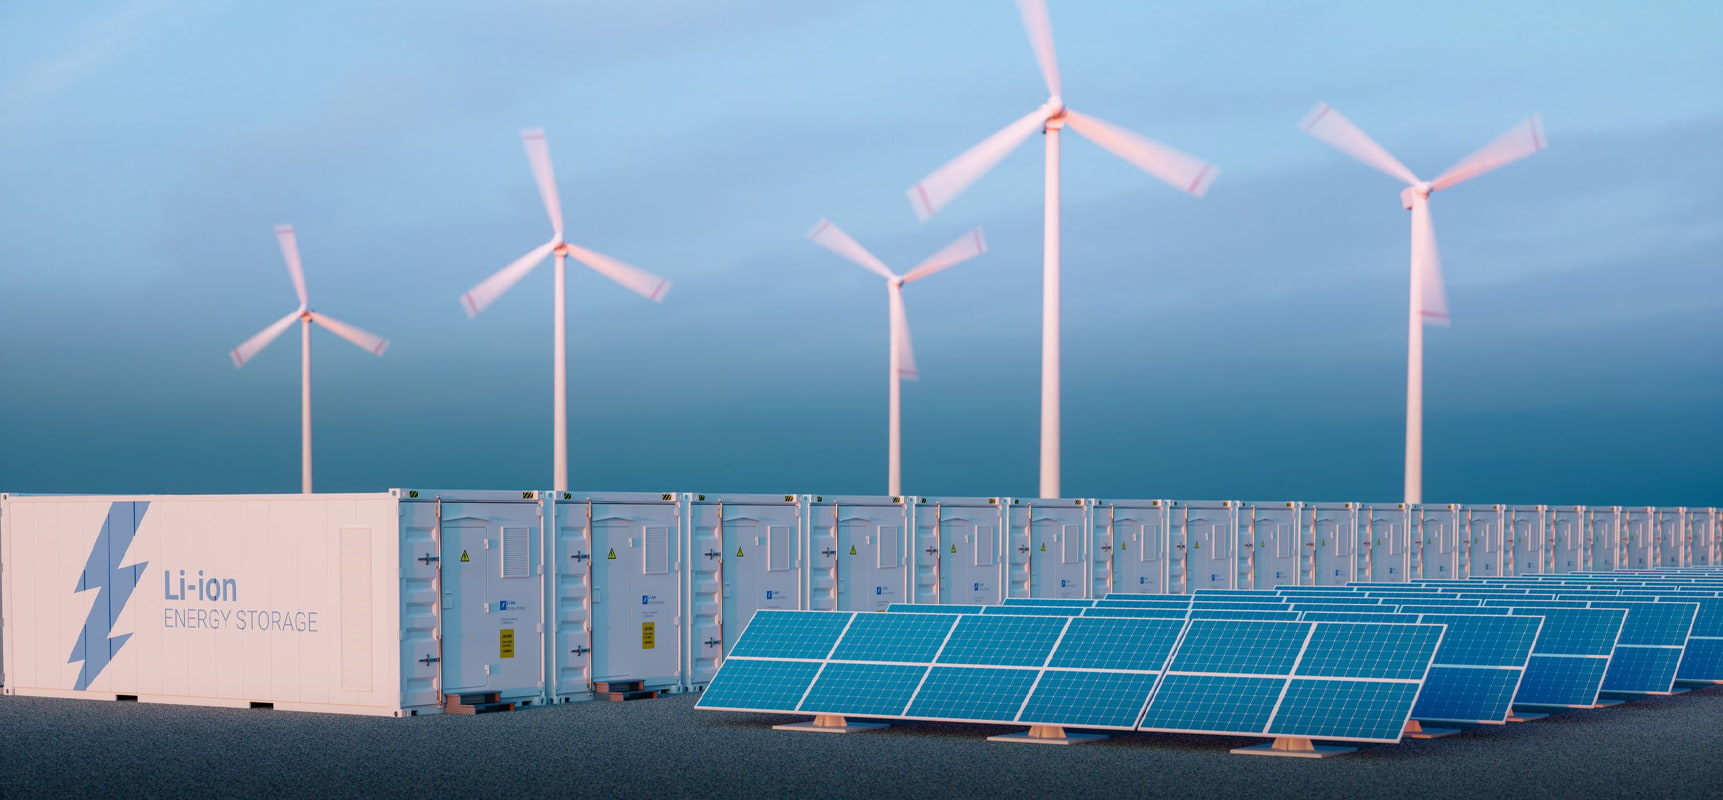 Why are there two energy storage units? Which one is used to calculate the unit price?